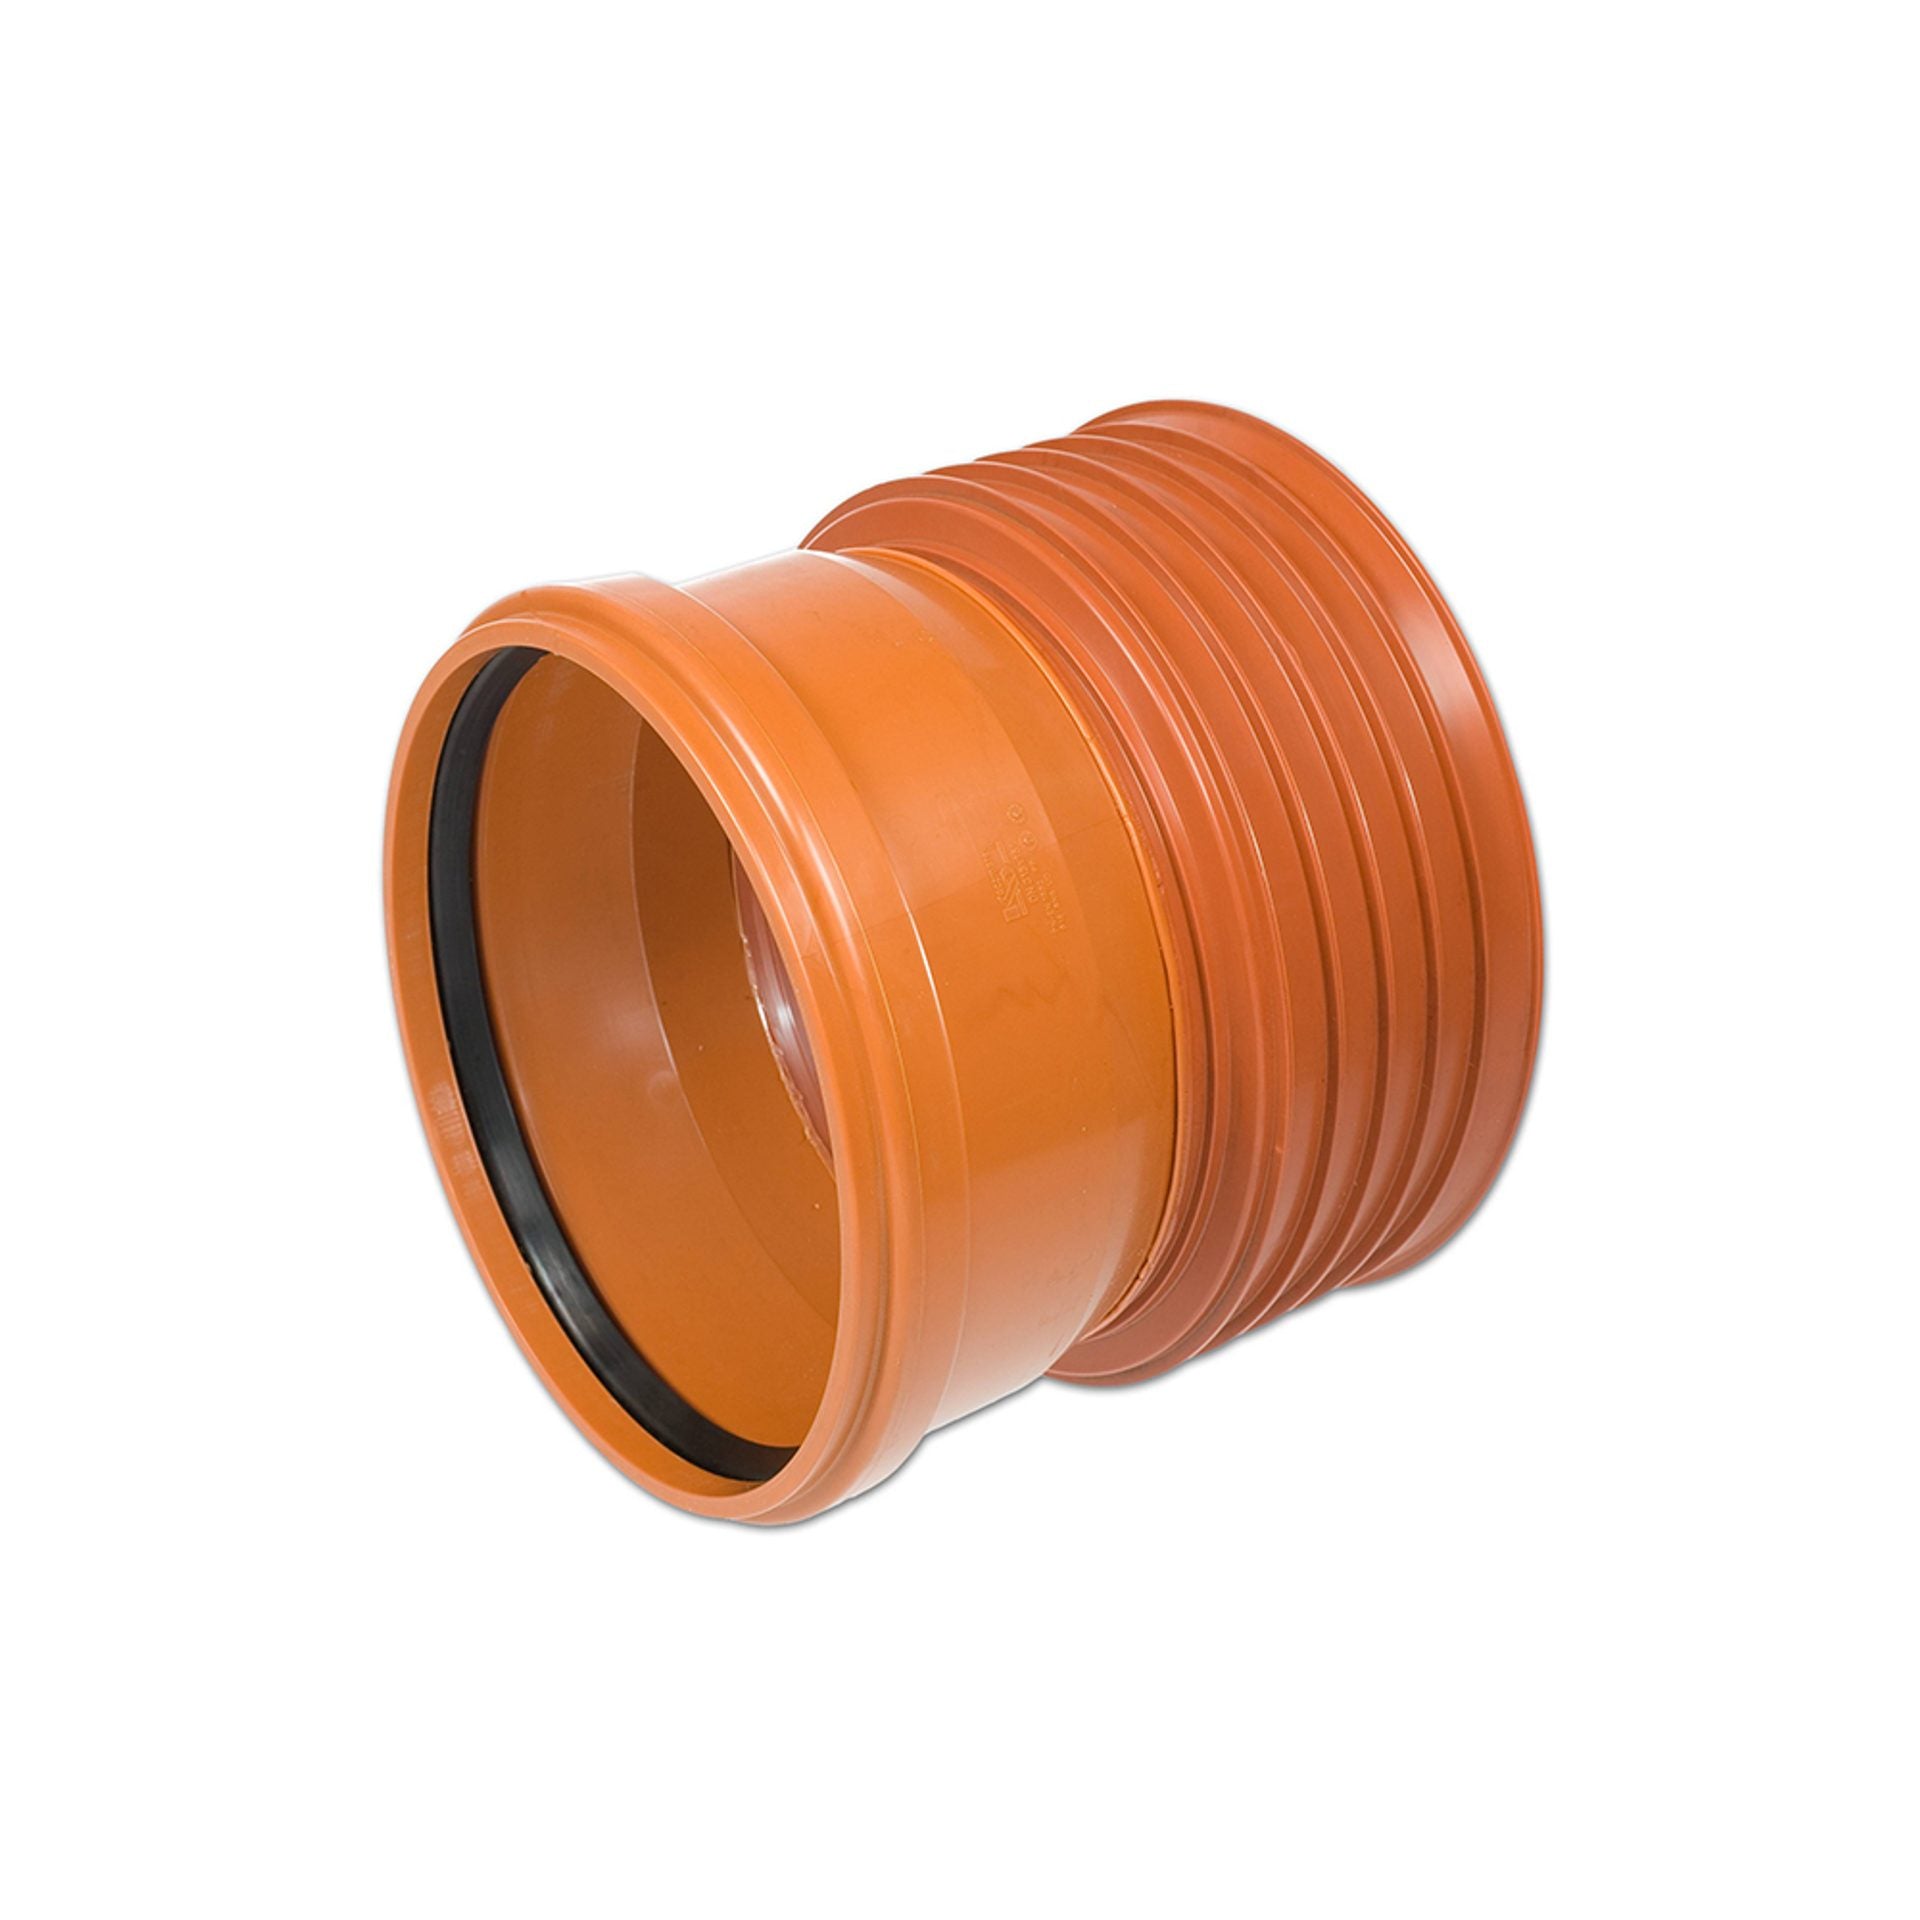 Coupling for Sewage pipe Kaczmarek K2-Kan OD PP for smooth PVC pipe without seal